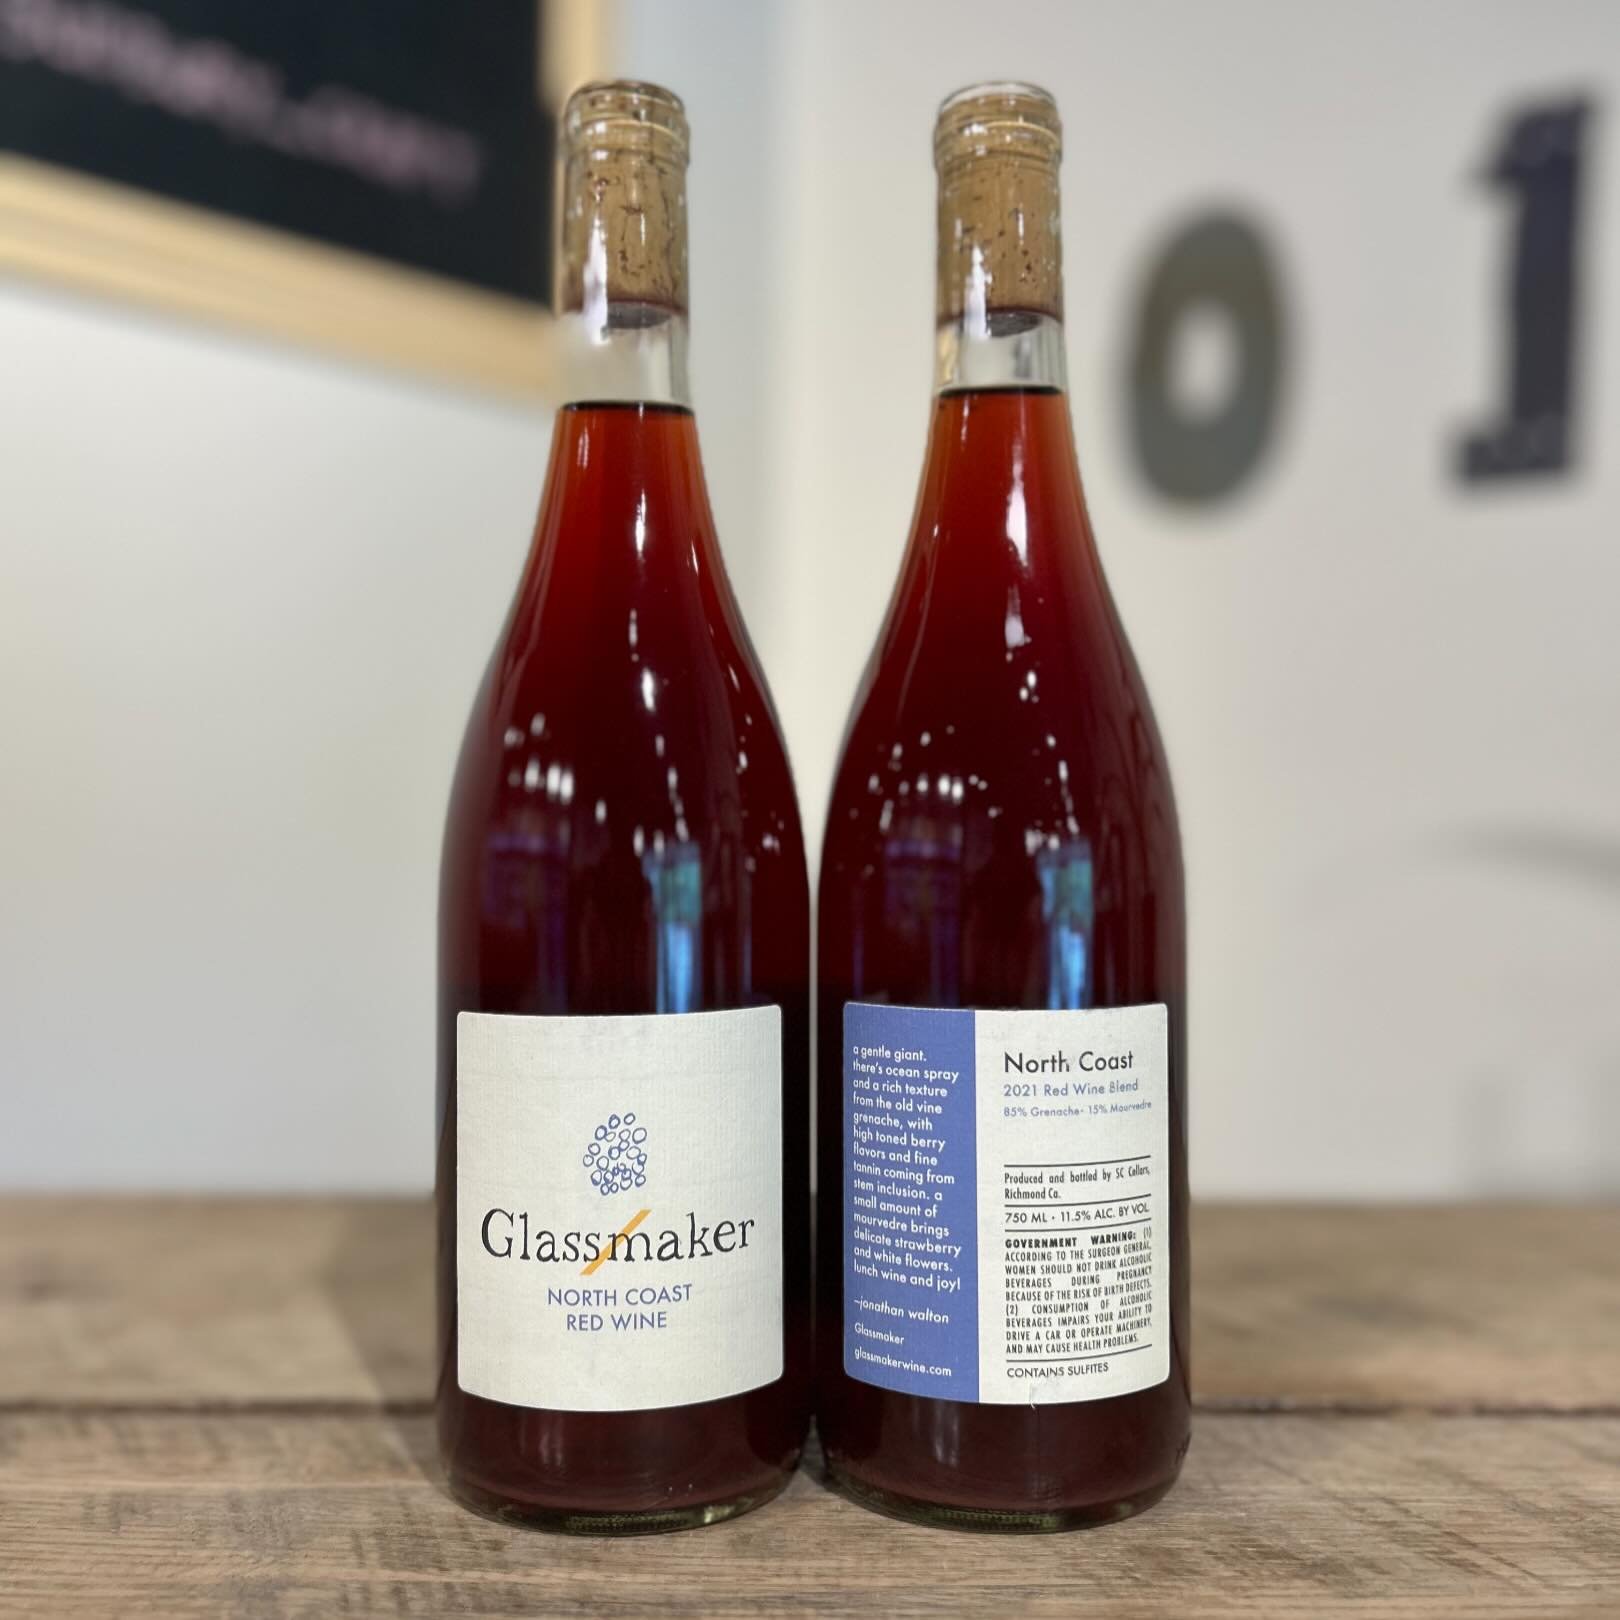 Introducing Glassmaker Wine Company #NowAvailable #SudburyCraftBeer #NaturalWine
&mdash;
About the producer:
Glassmaker is Jonathan Walton&rsquo;s personal wine project which he does alongside being the winemaker behind Subject to Change. Jonathan ha